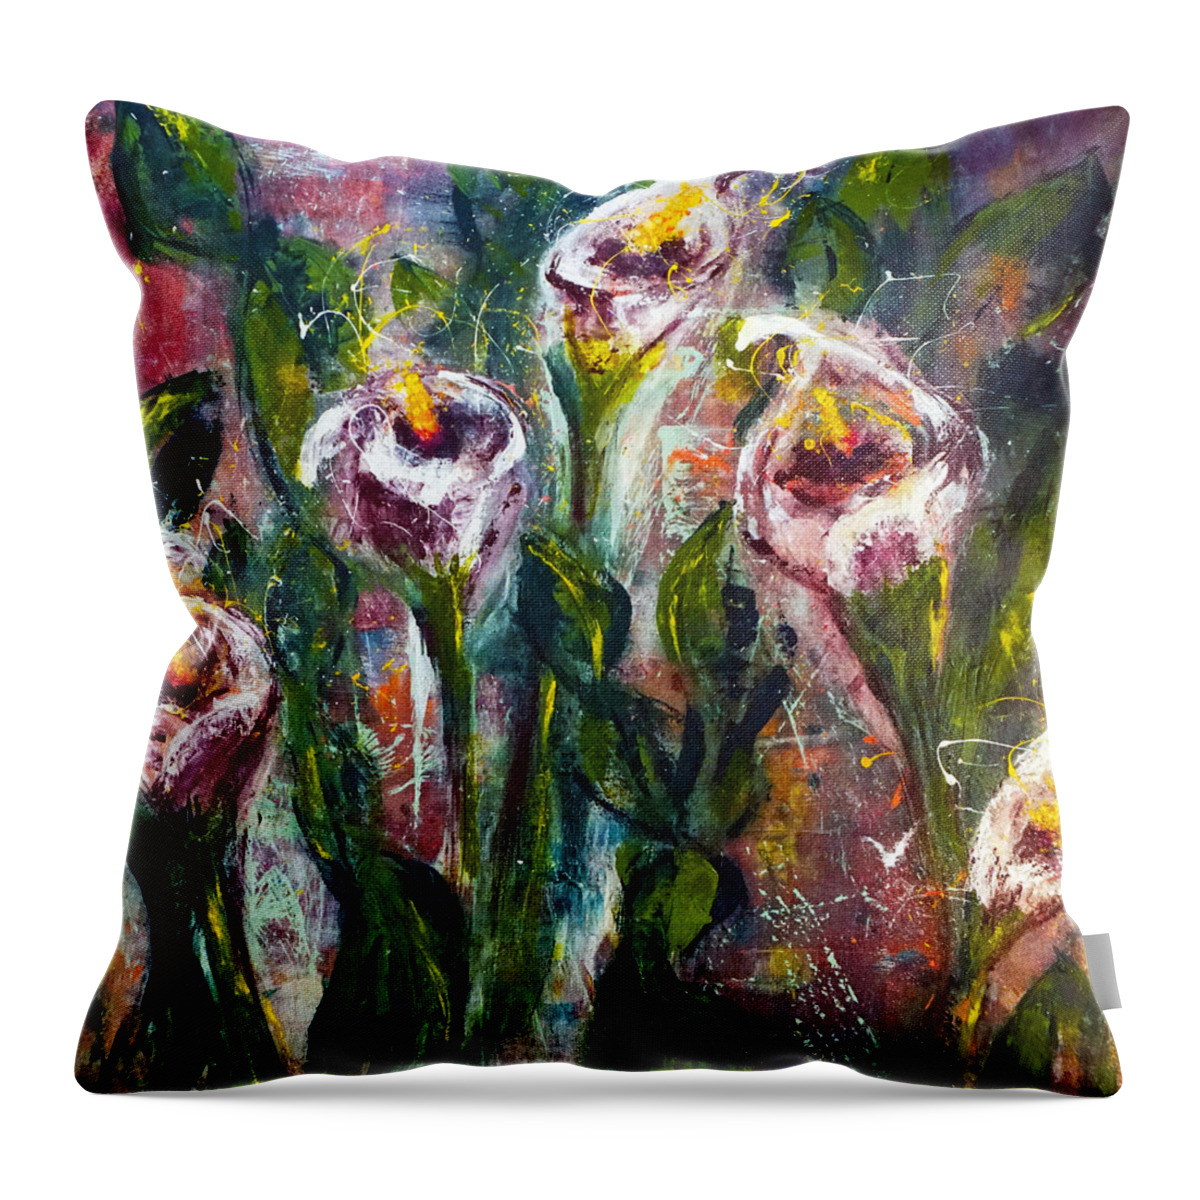 Calla Lily Throw Pillow featuring the painting Calla Lily Midnight by Joanne Herrmann